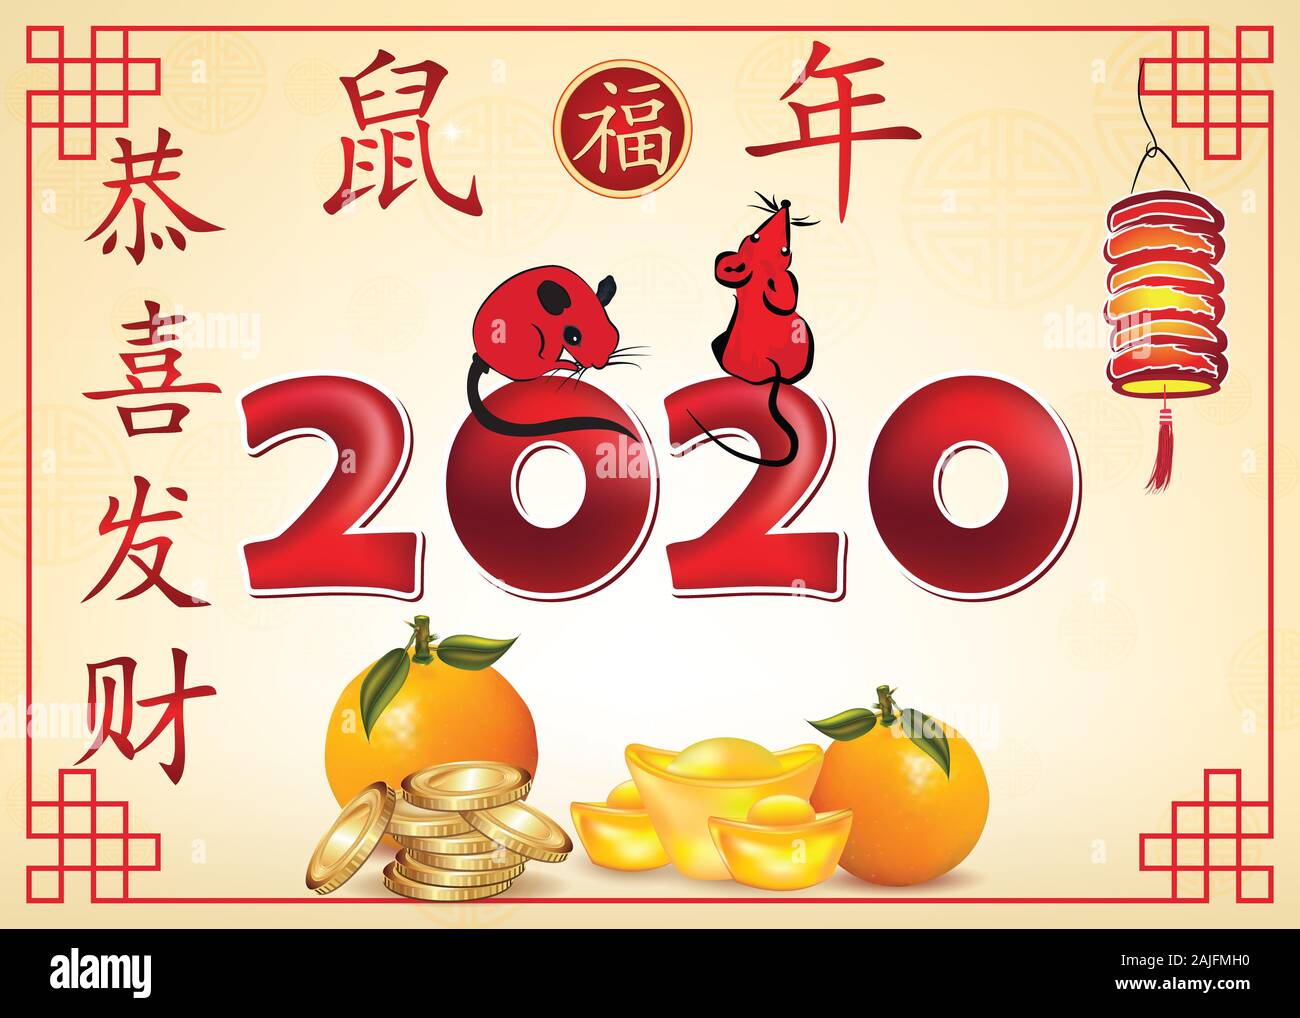 Chinese greeting card - Happy Chinese New Year of the Rat 2020! Text translation: Gong Xi Fa Cai - Congratulations and make fortune. Year of the Rat Stock Photo